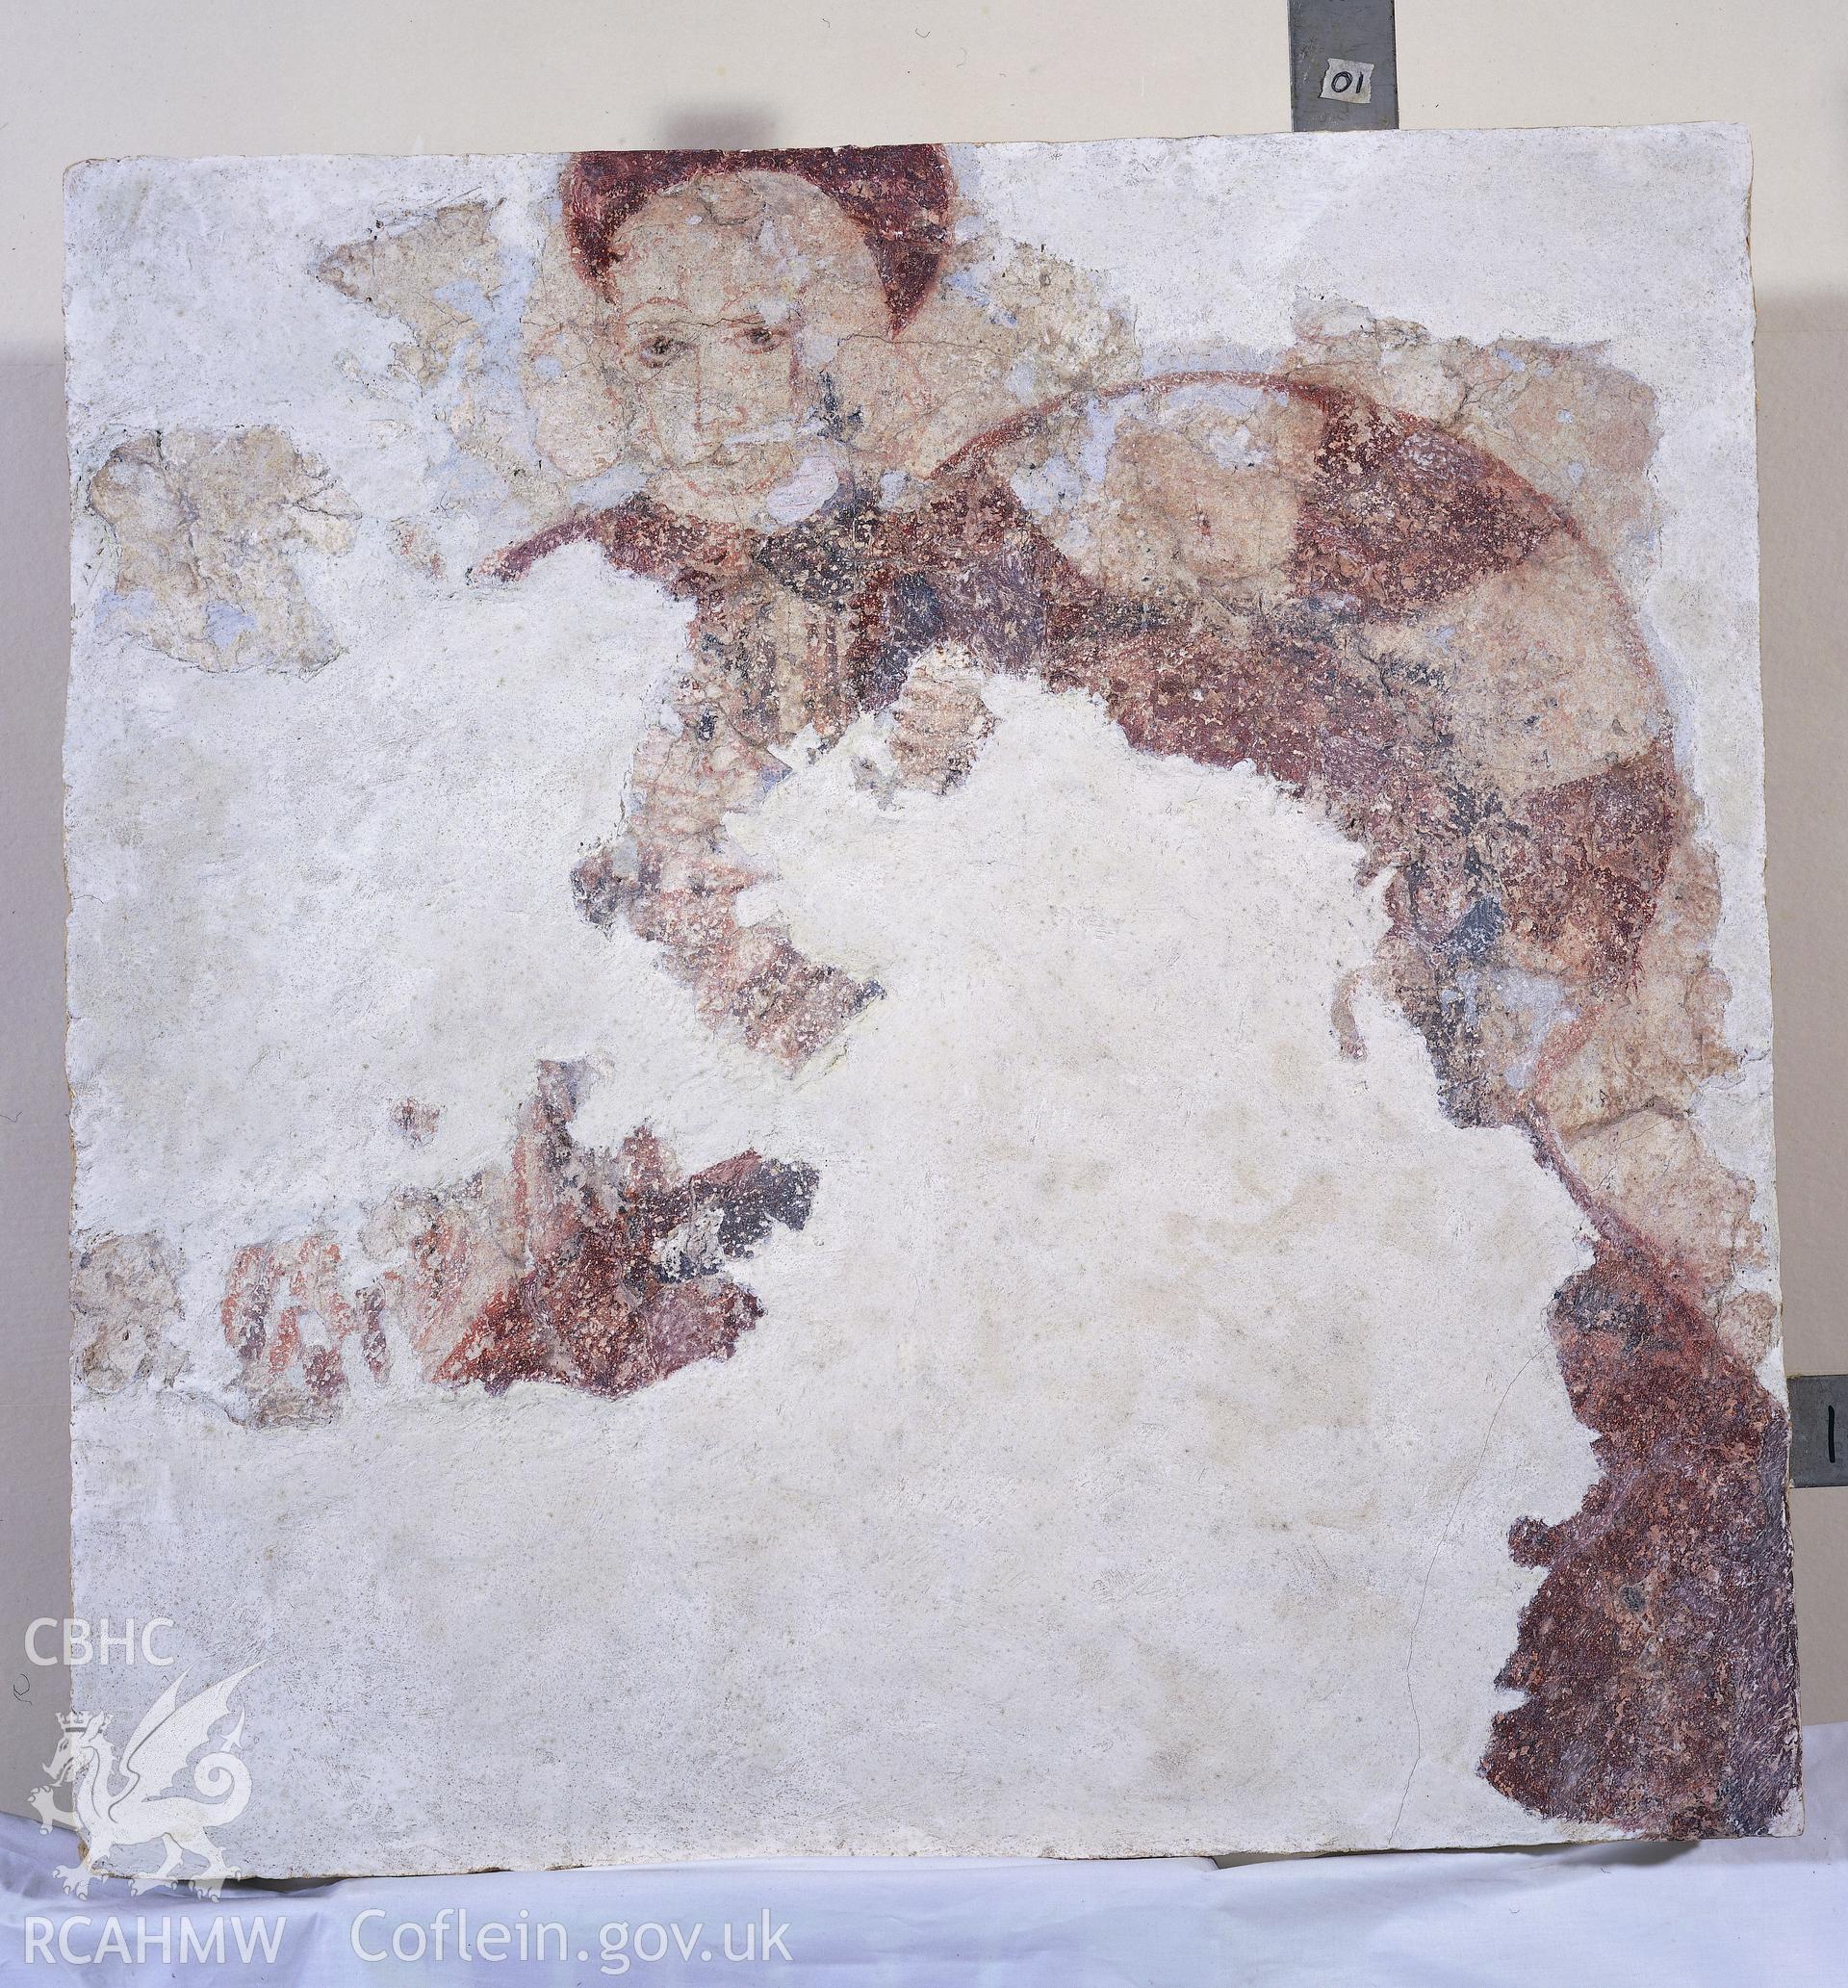 RCAHMW colour transparency showing view of wallpainting at Llandeilo Talybont Church.